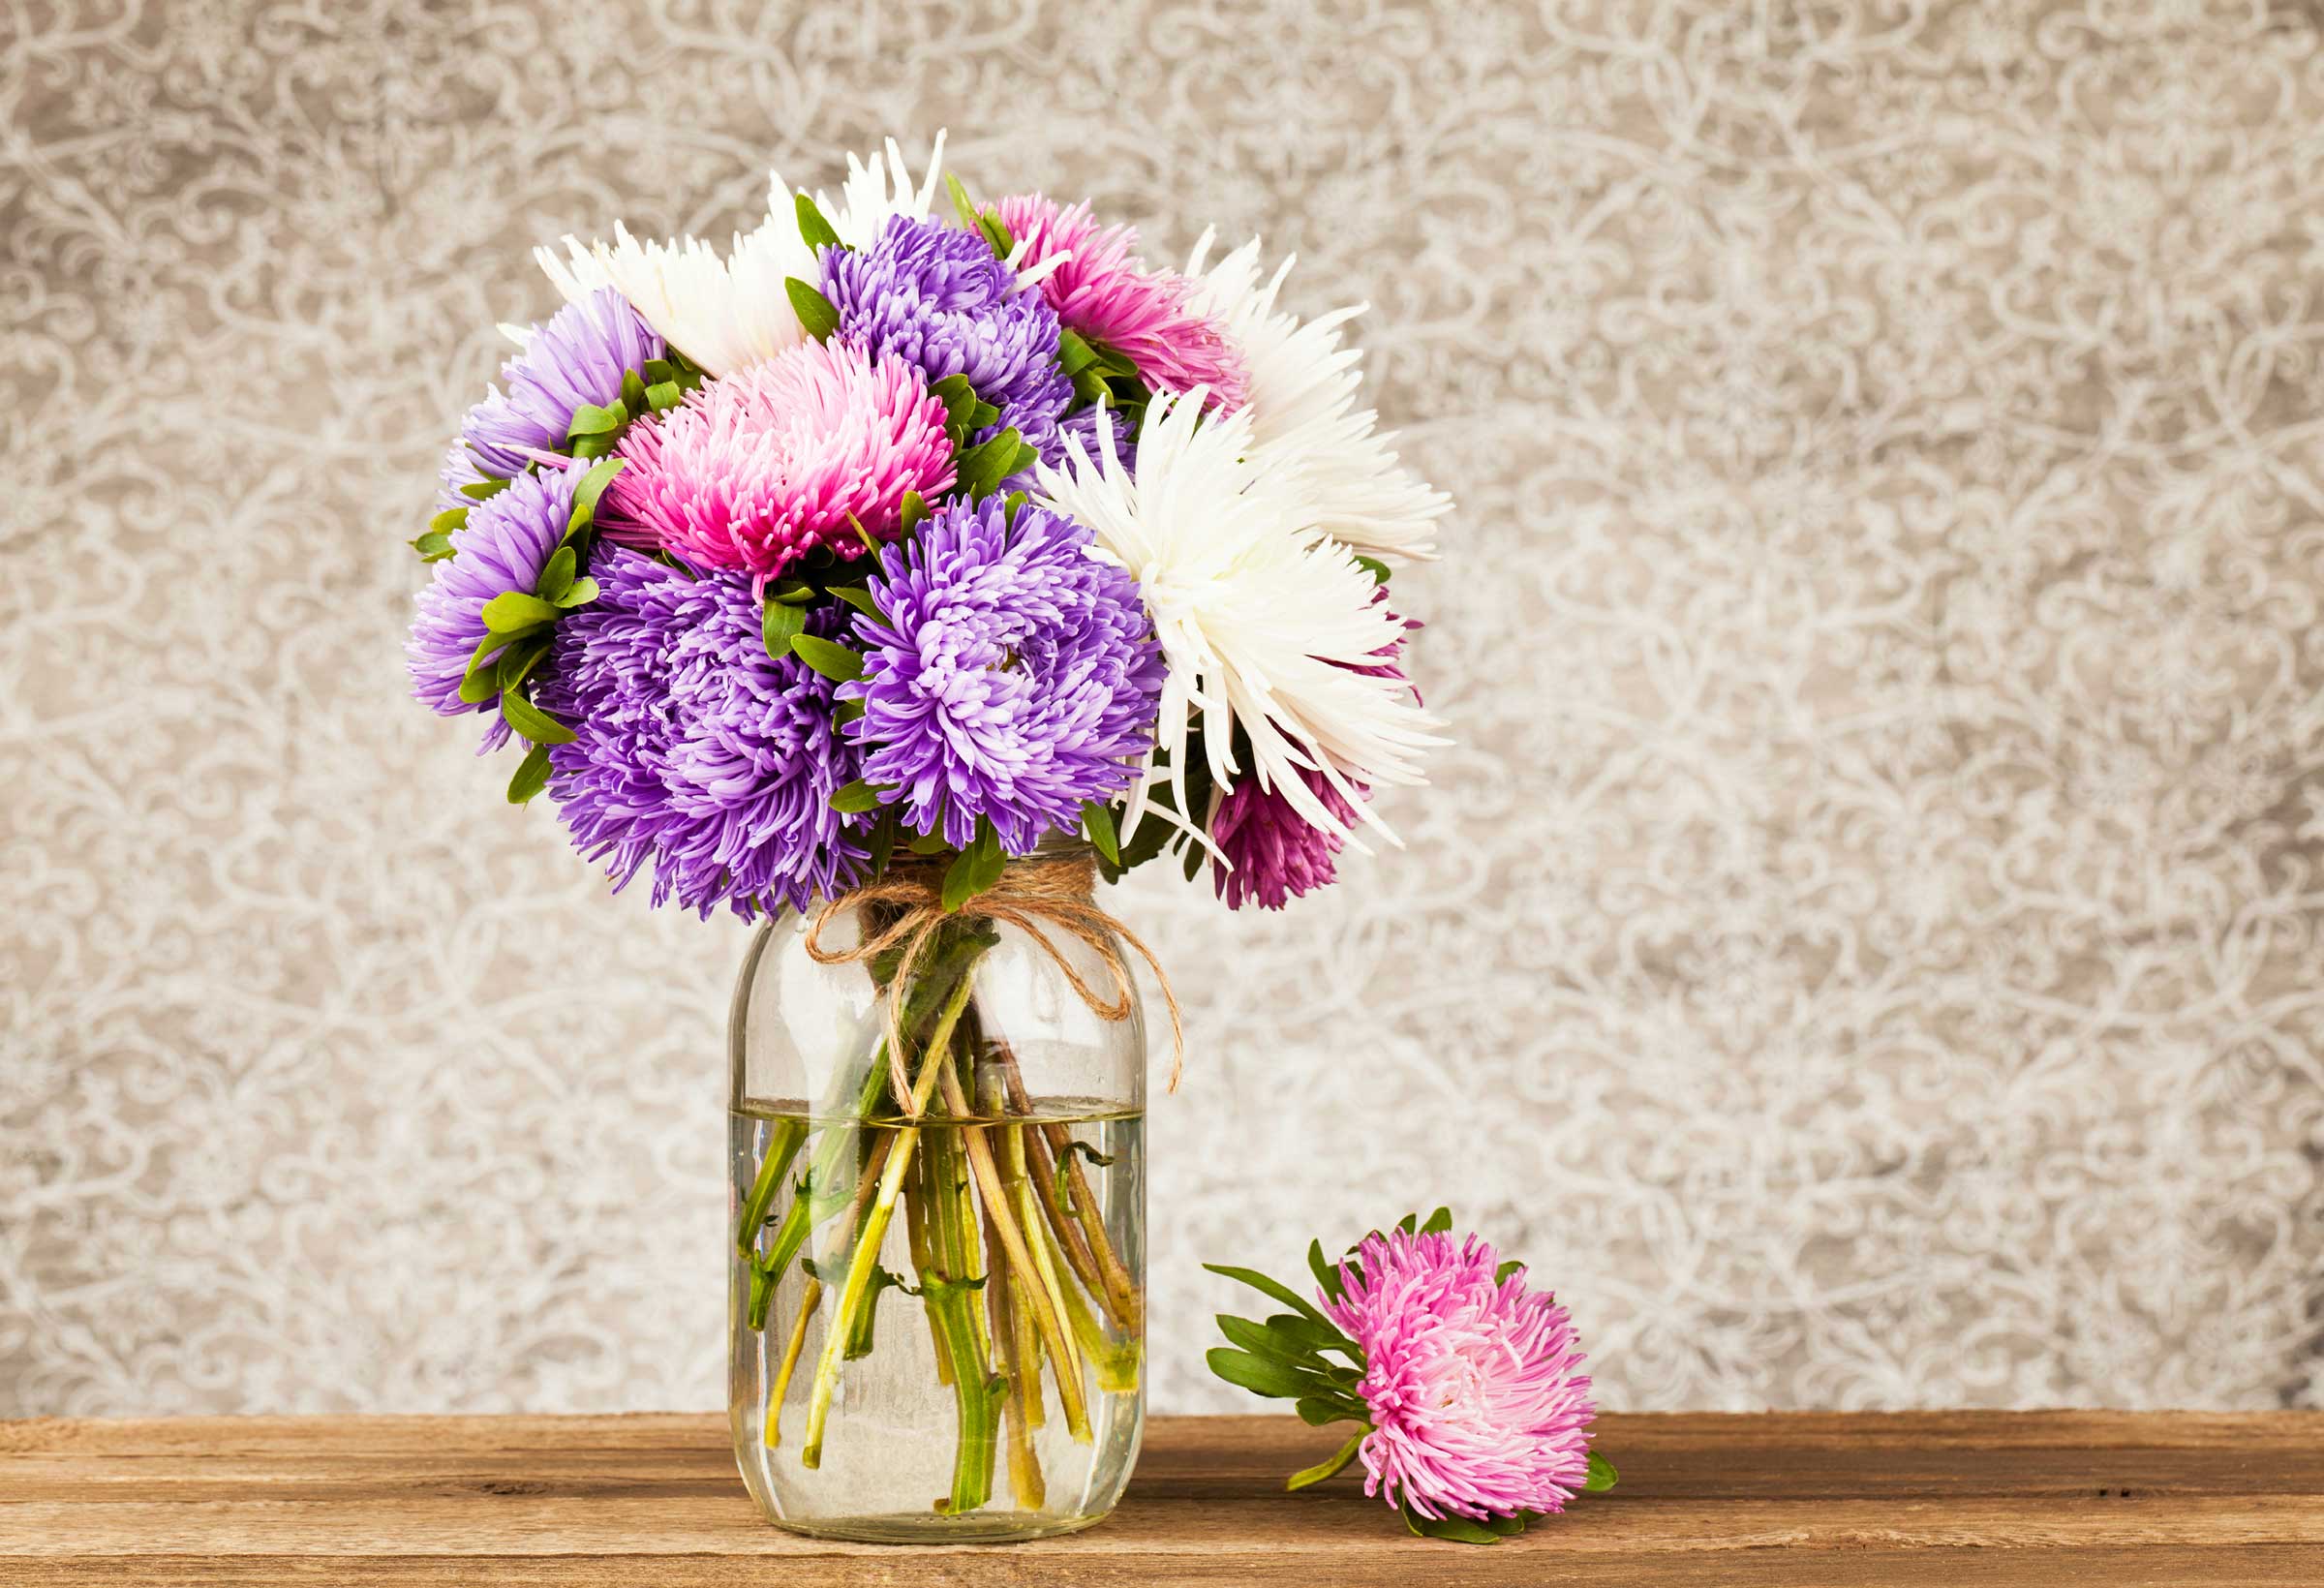 26 Things Your Florist Won't Tell You | Reader's Digest